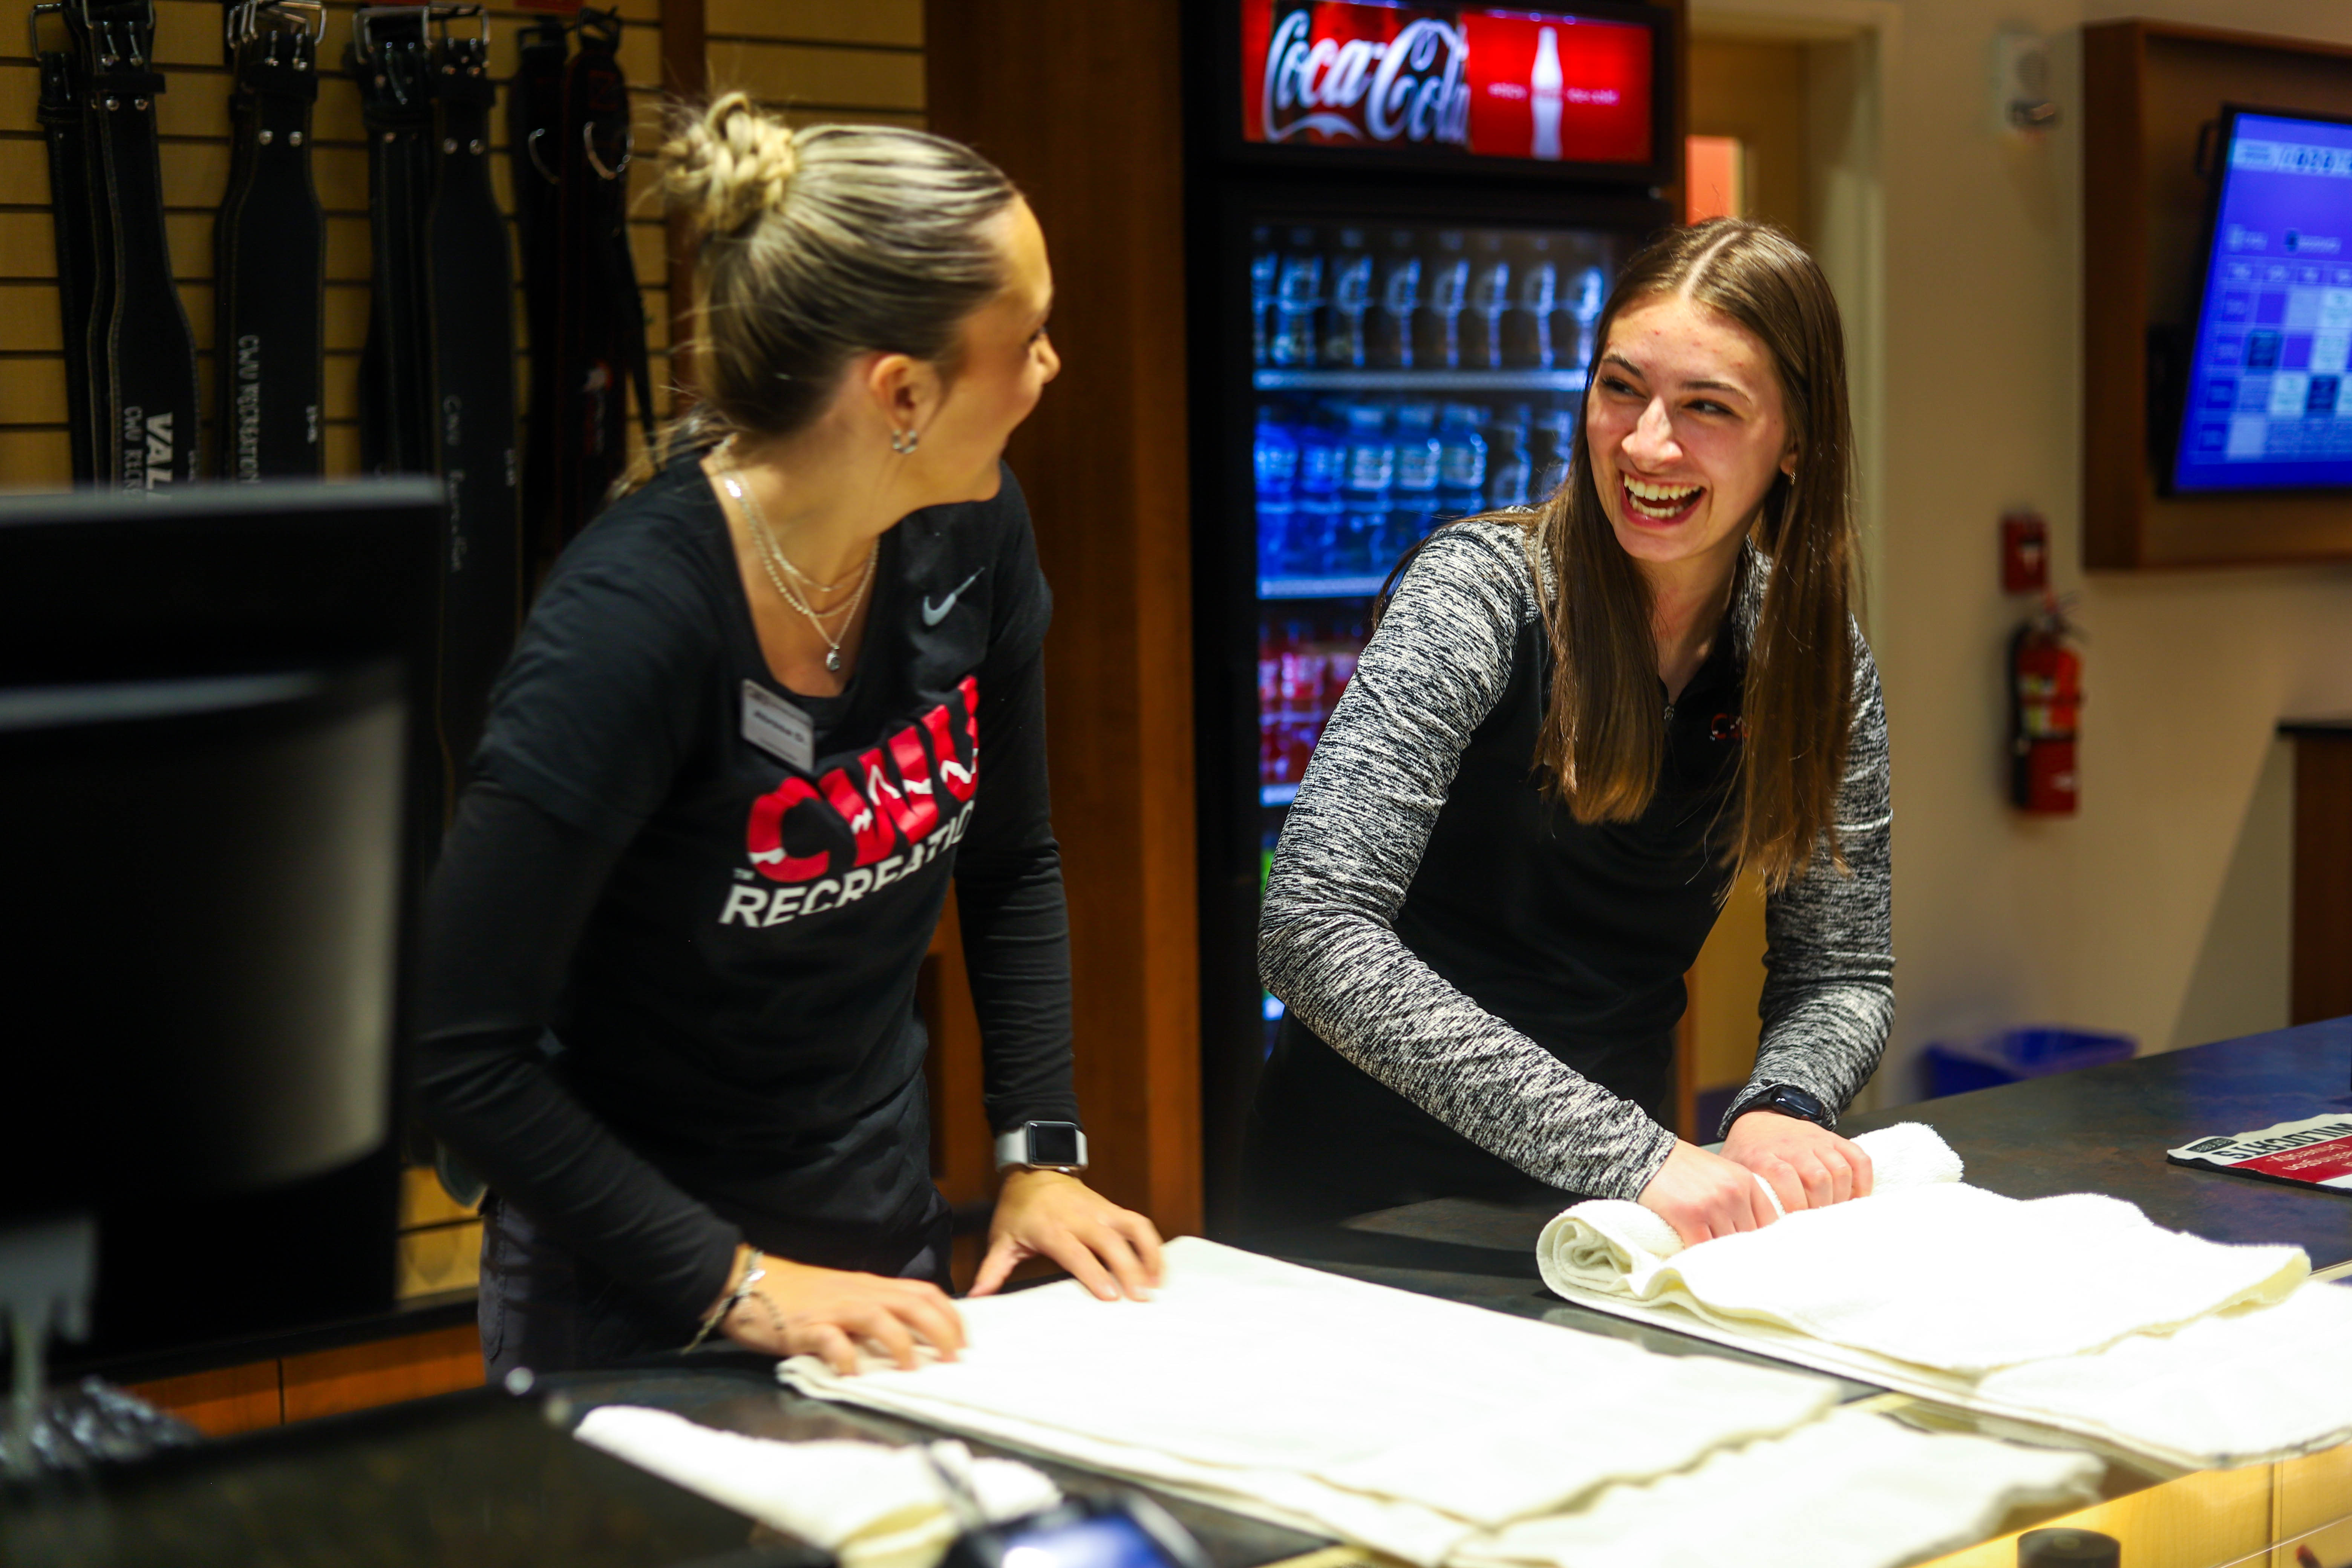 Two female student workers at the Recreation Center front desk laughing together and cleaning the counter. They are both wearing CWU gear.